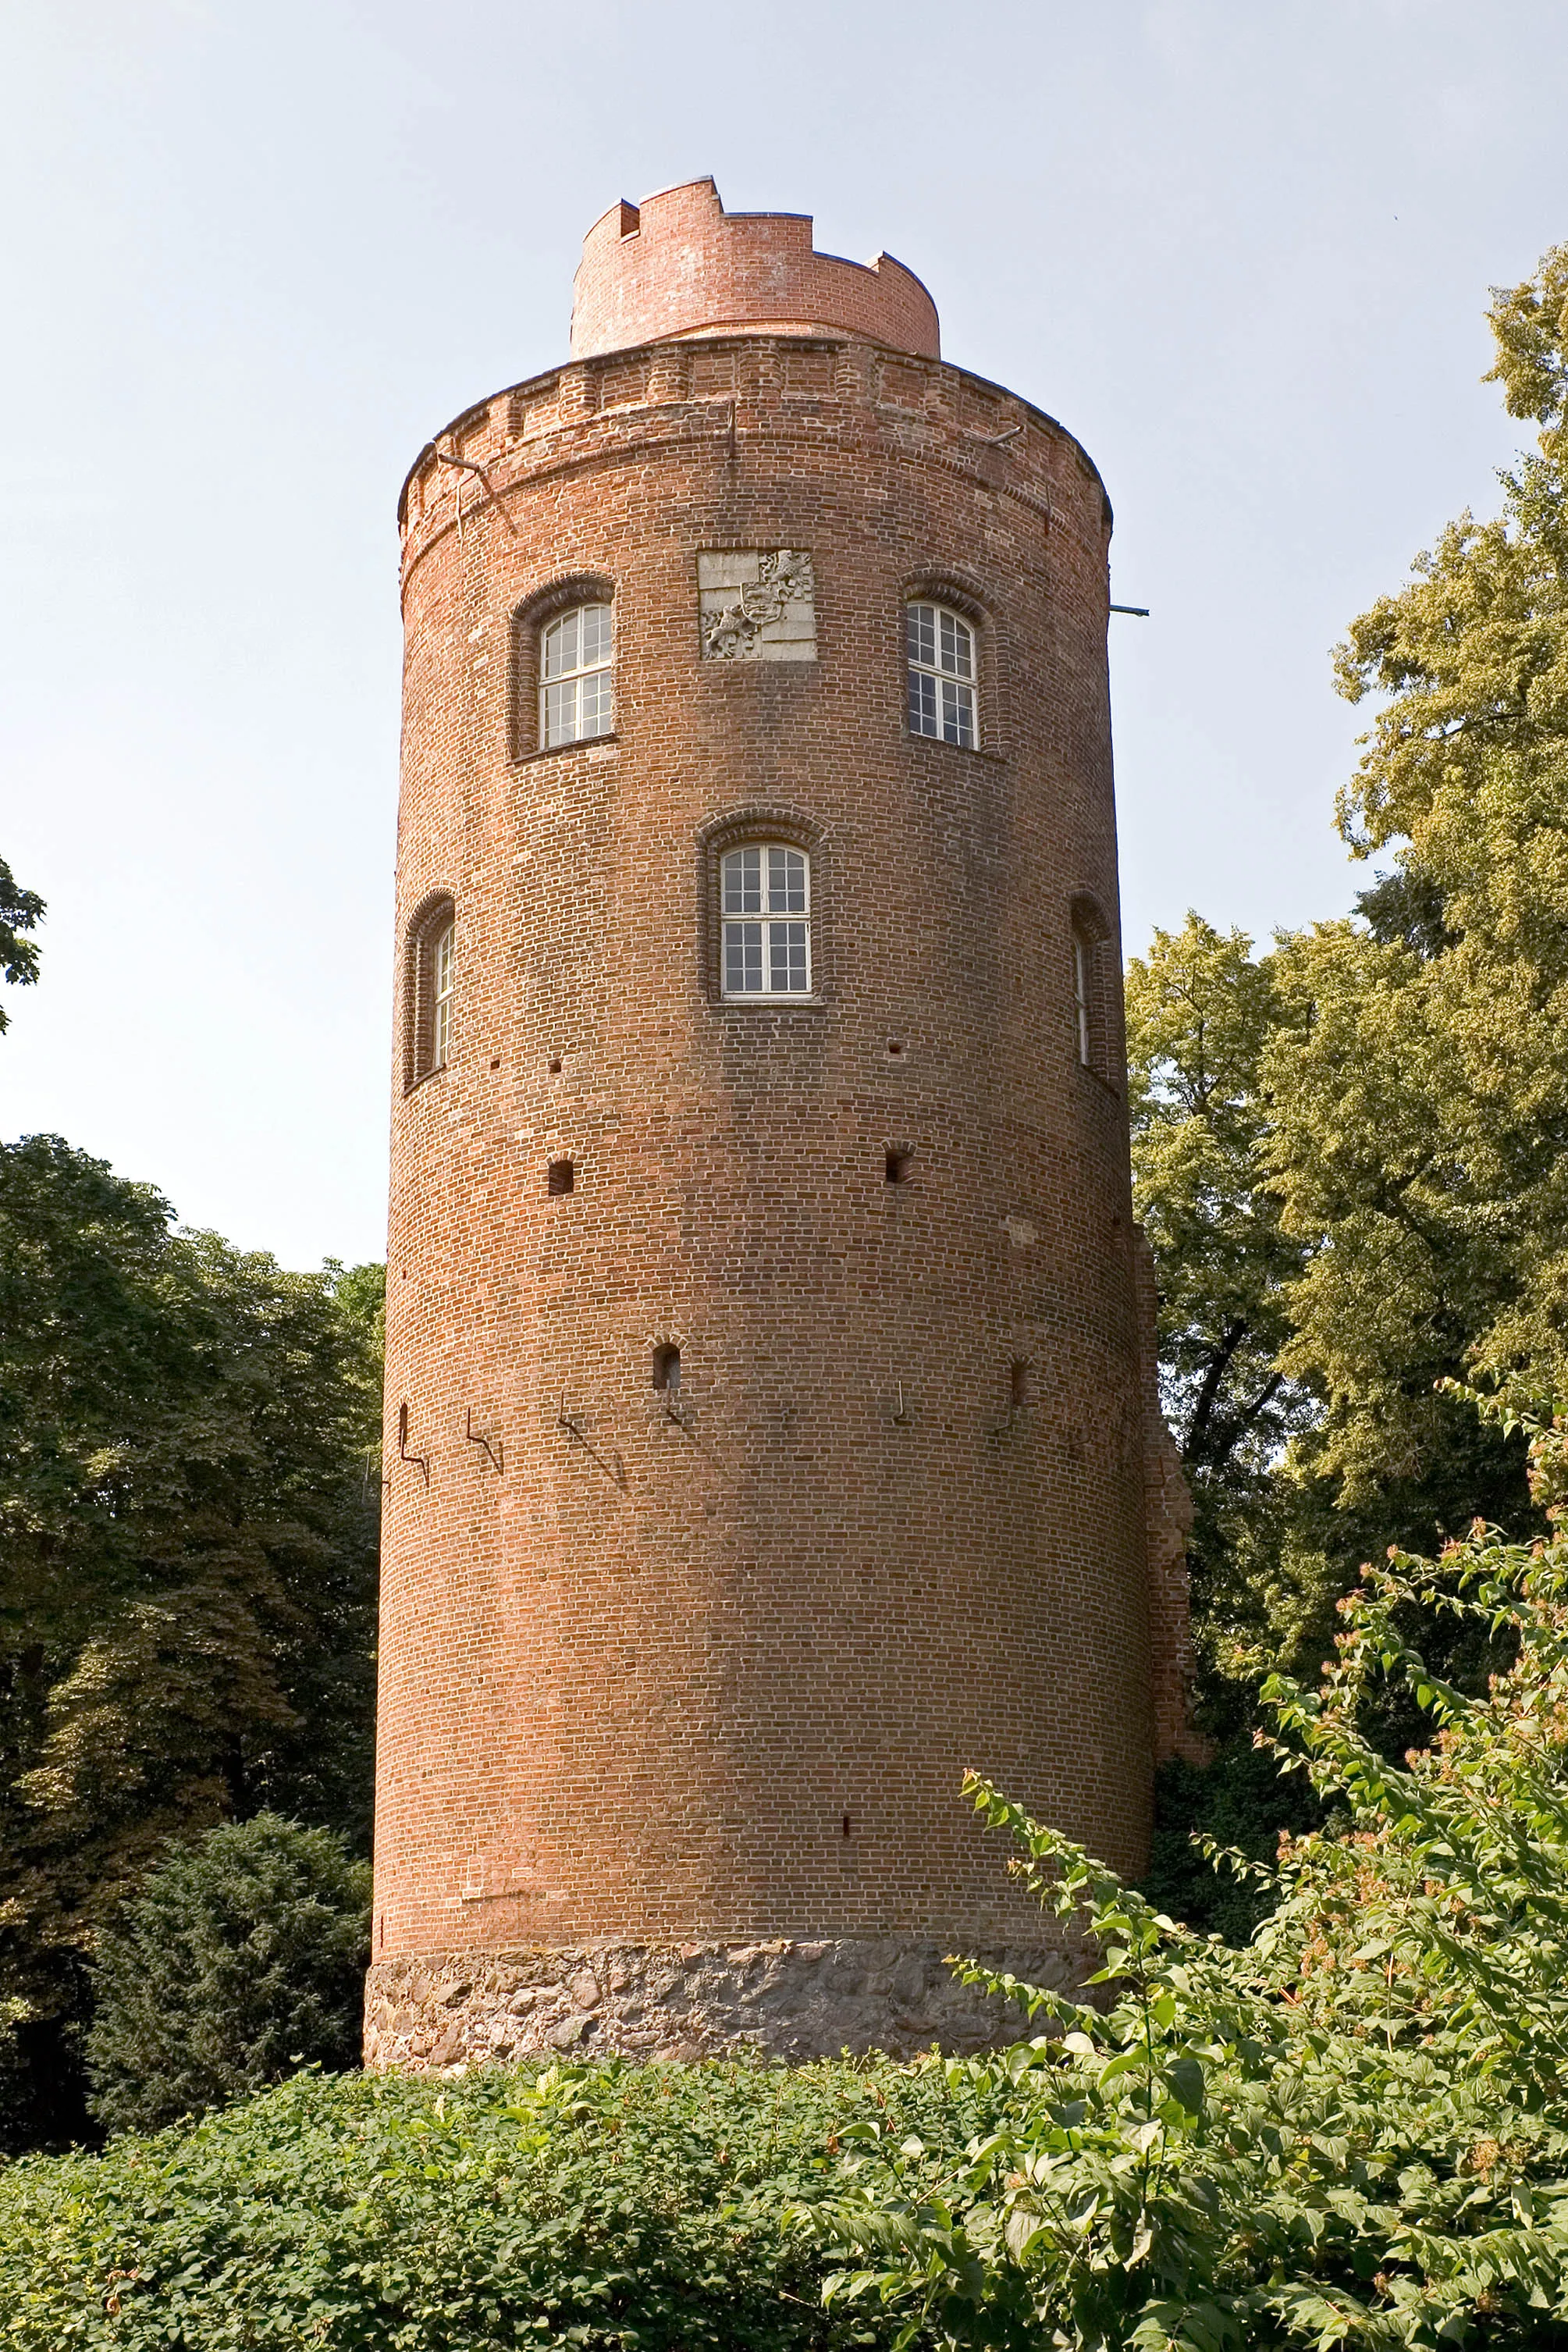 Photo showing: Amtsturm, remains of the former castle of the county Lüchow (of about 1100 to 1320), in Lüchow (Wendland) in Lower Saxony, Germany.